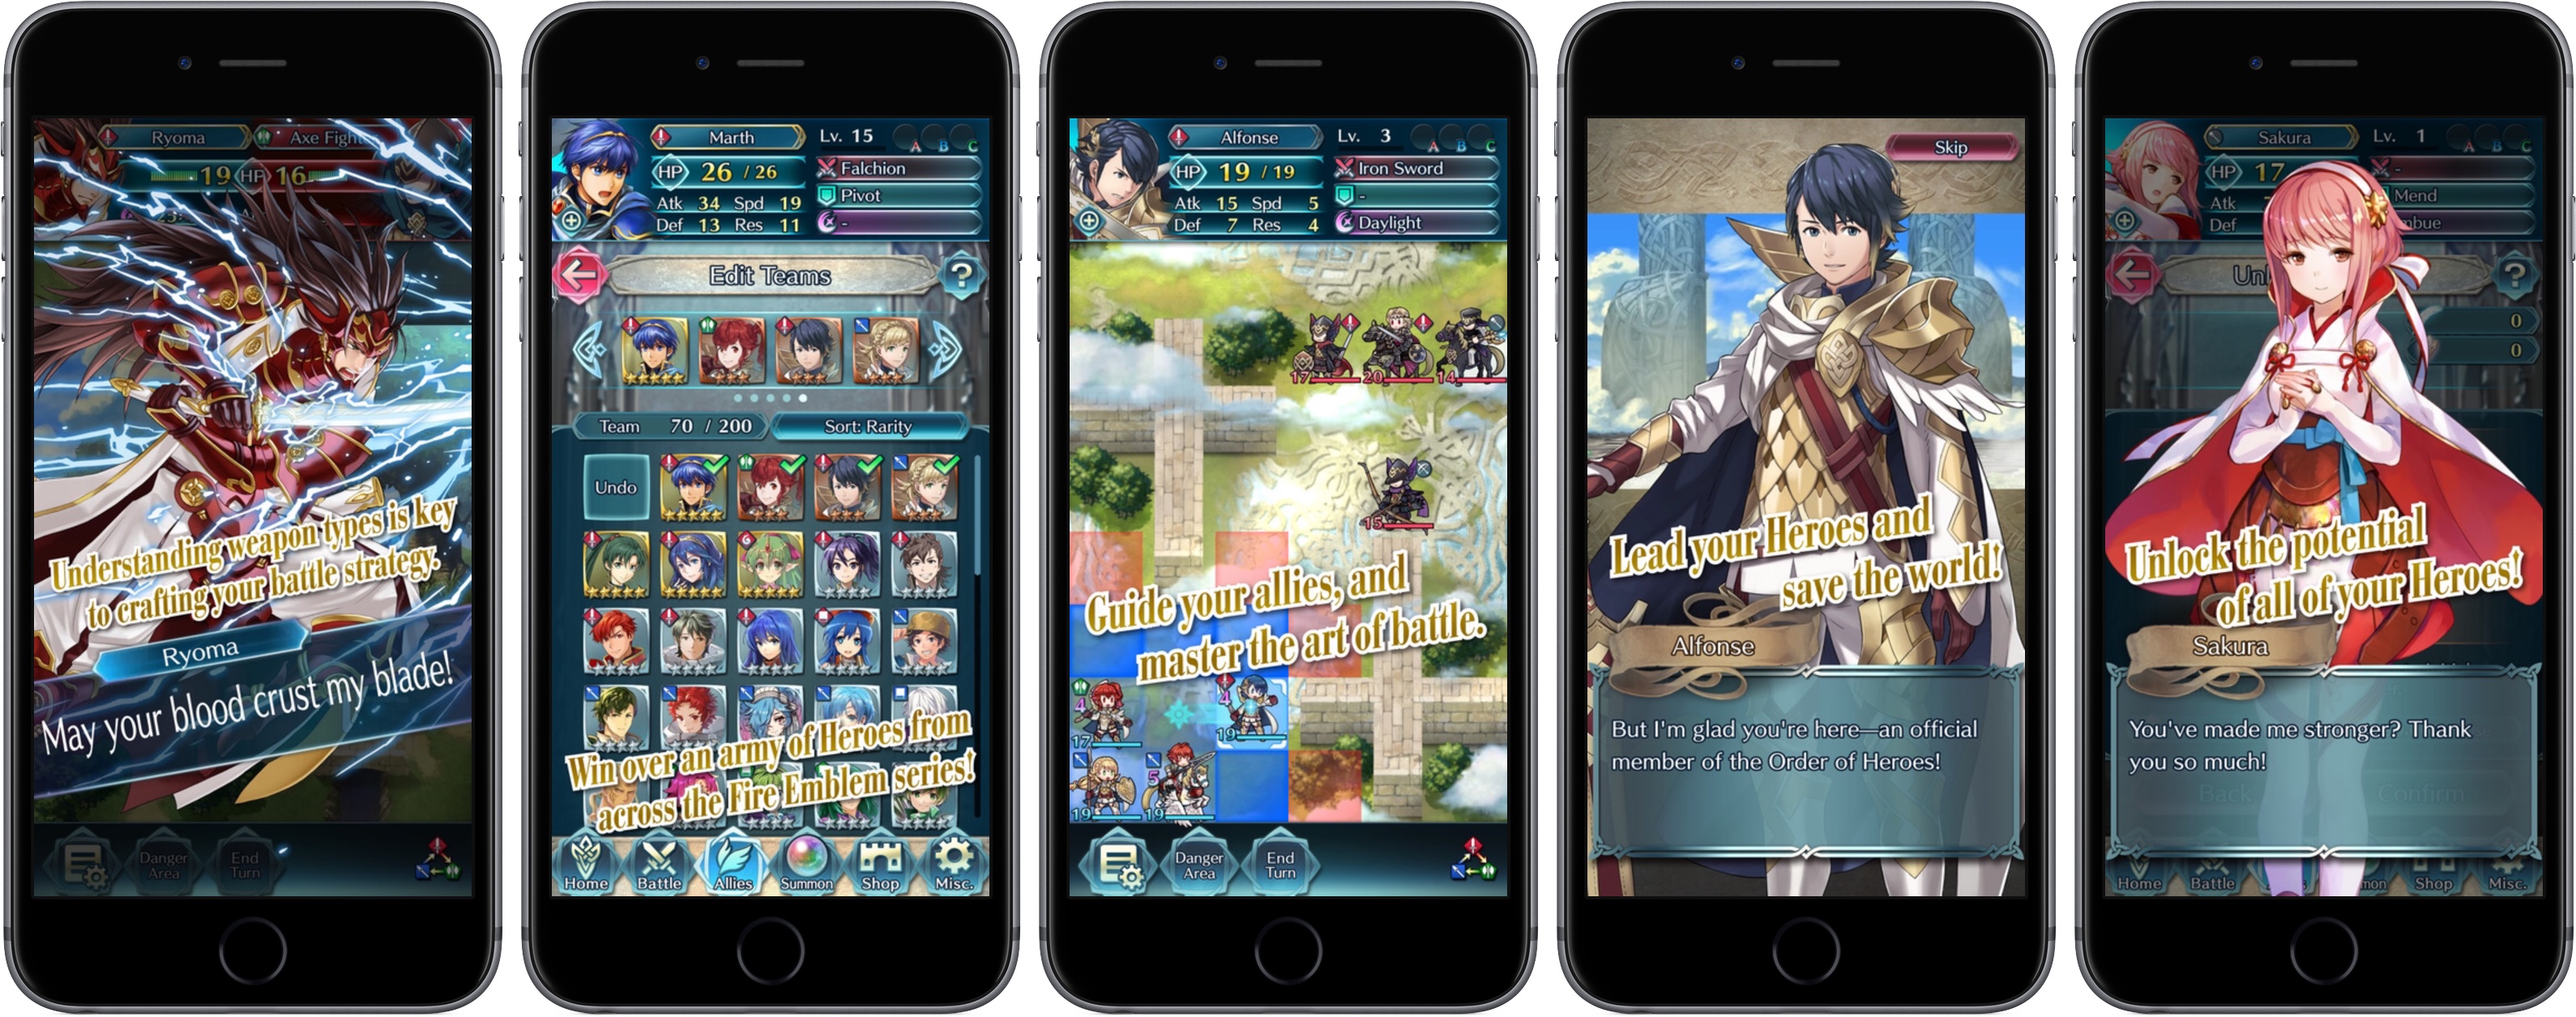 Nintedo S Fire Emblem Heroes Is Releasing On Ios And Android Today